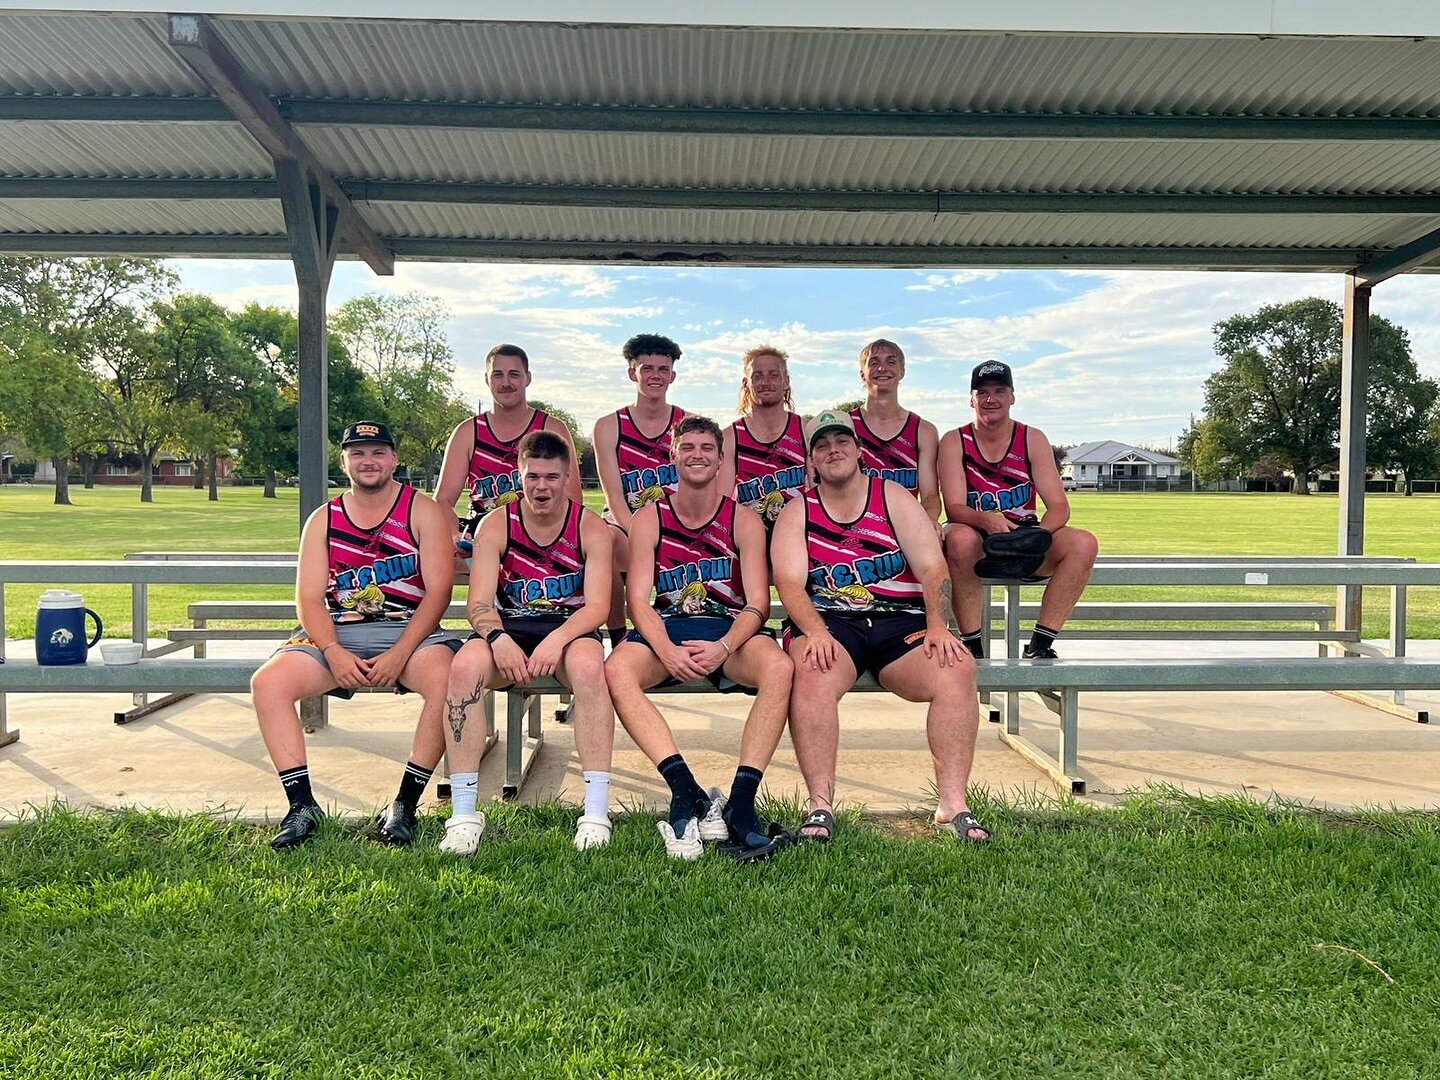 A big shout out to the &ldquo;HIT AND RUN&rdquo; touch team who have made it to the grand final! 2 of our staff members, Jaiden &amp; Matt and the team, go head to head for the trophy tonight, best of luck from the CMC crew! 🏉